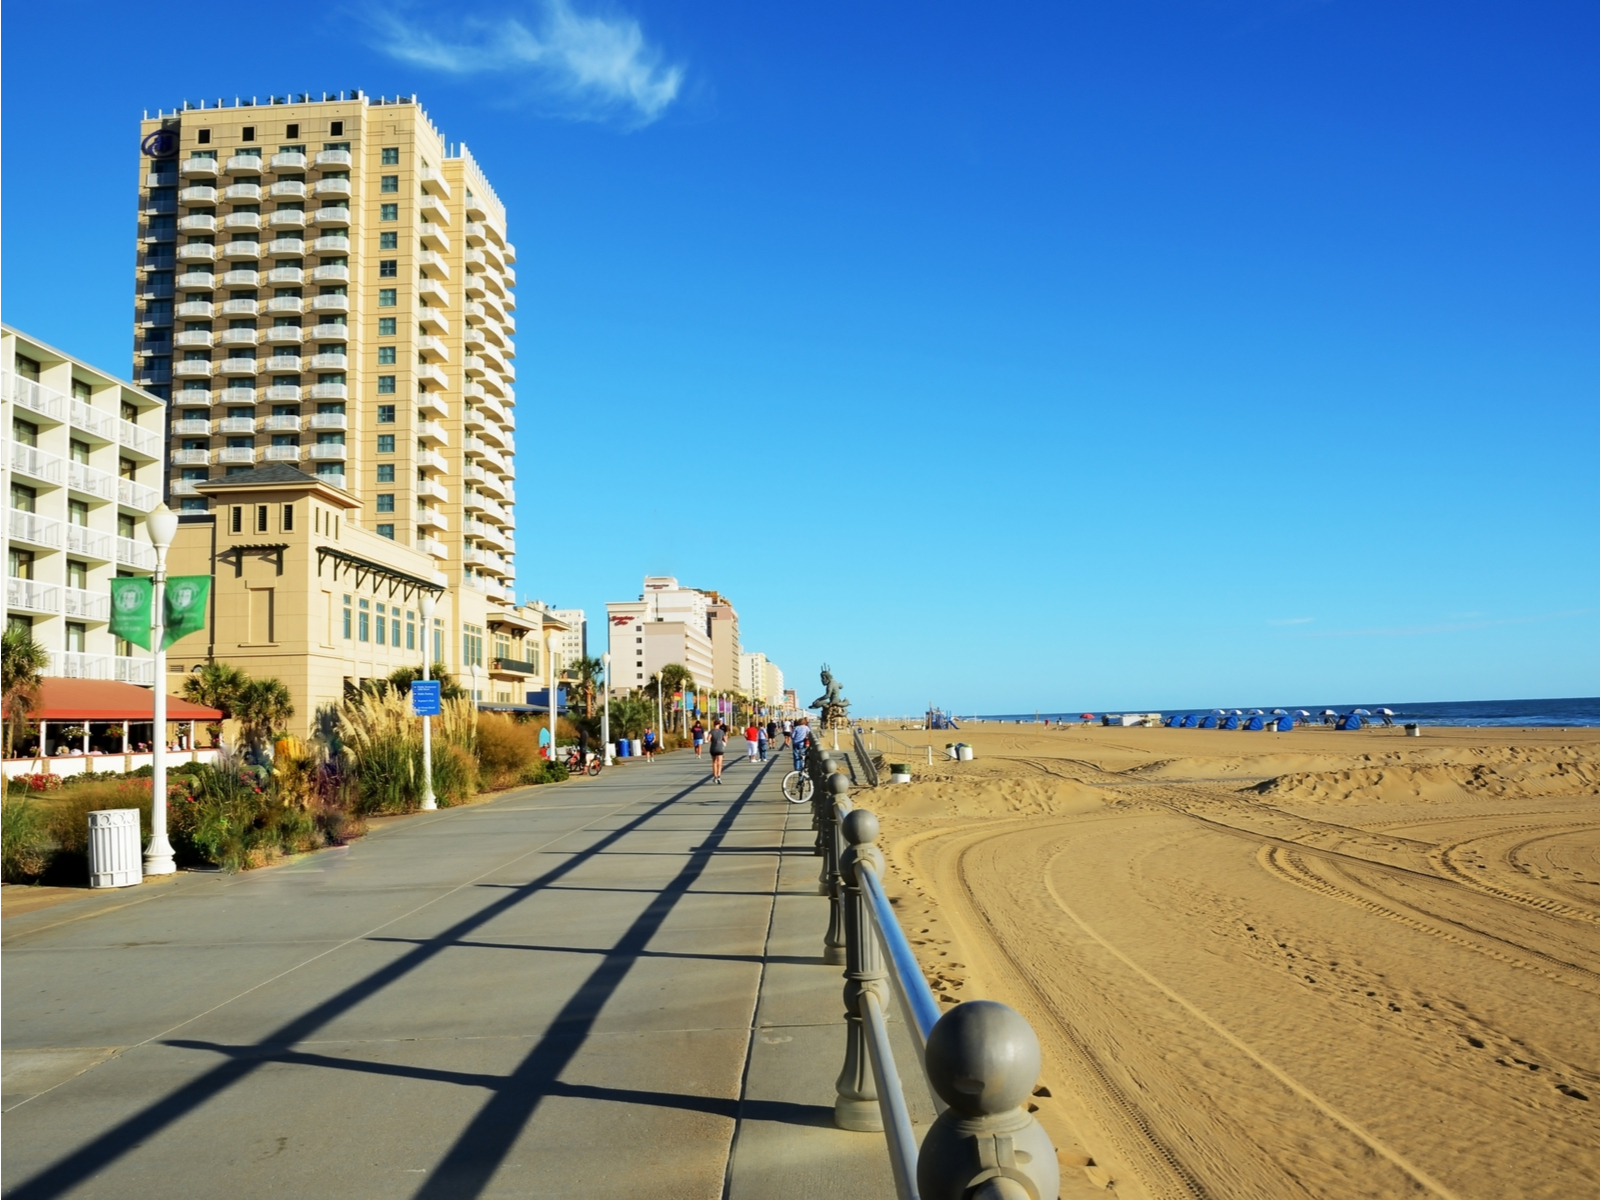 Boardwalk in Virginia Beach, one of the things to do when staying at one of the best Airbnbs in Virginia